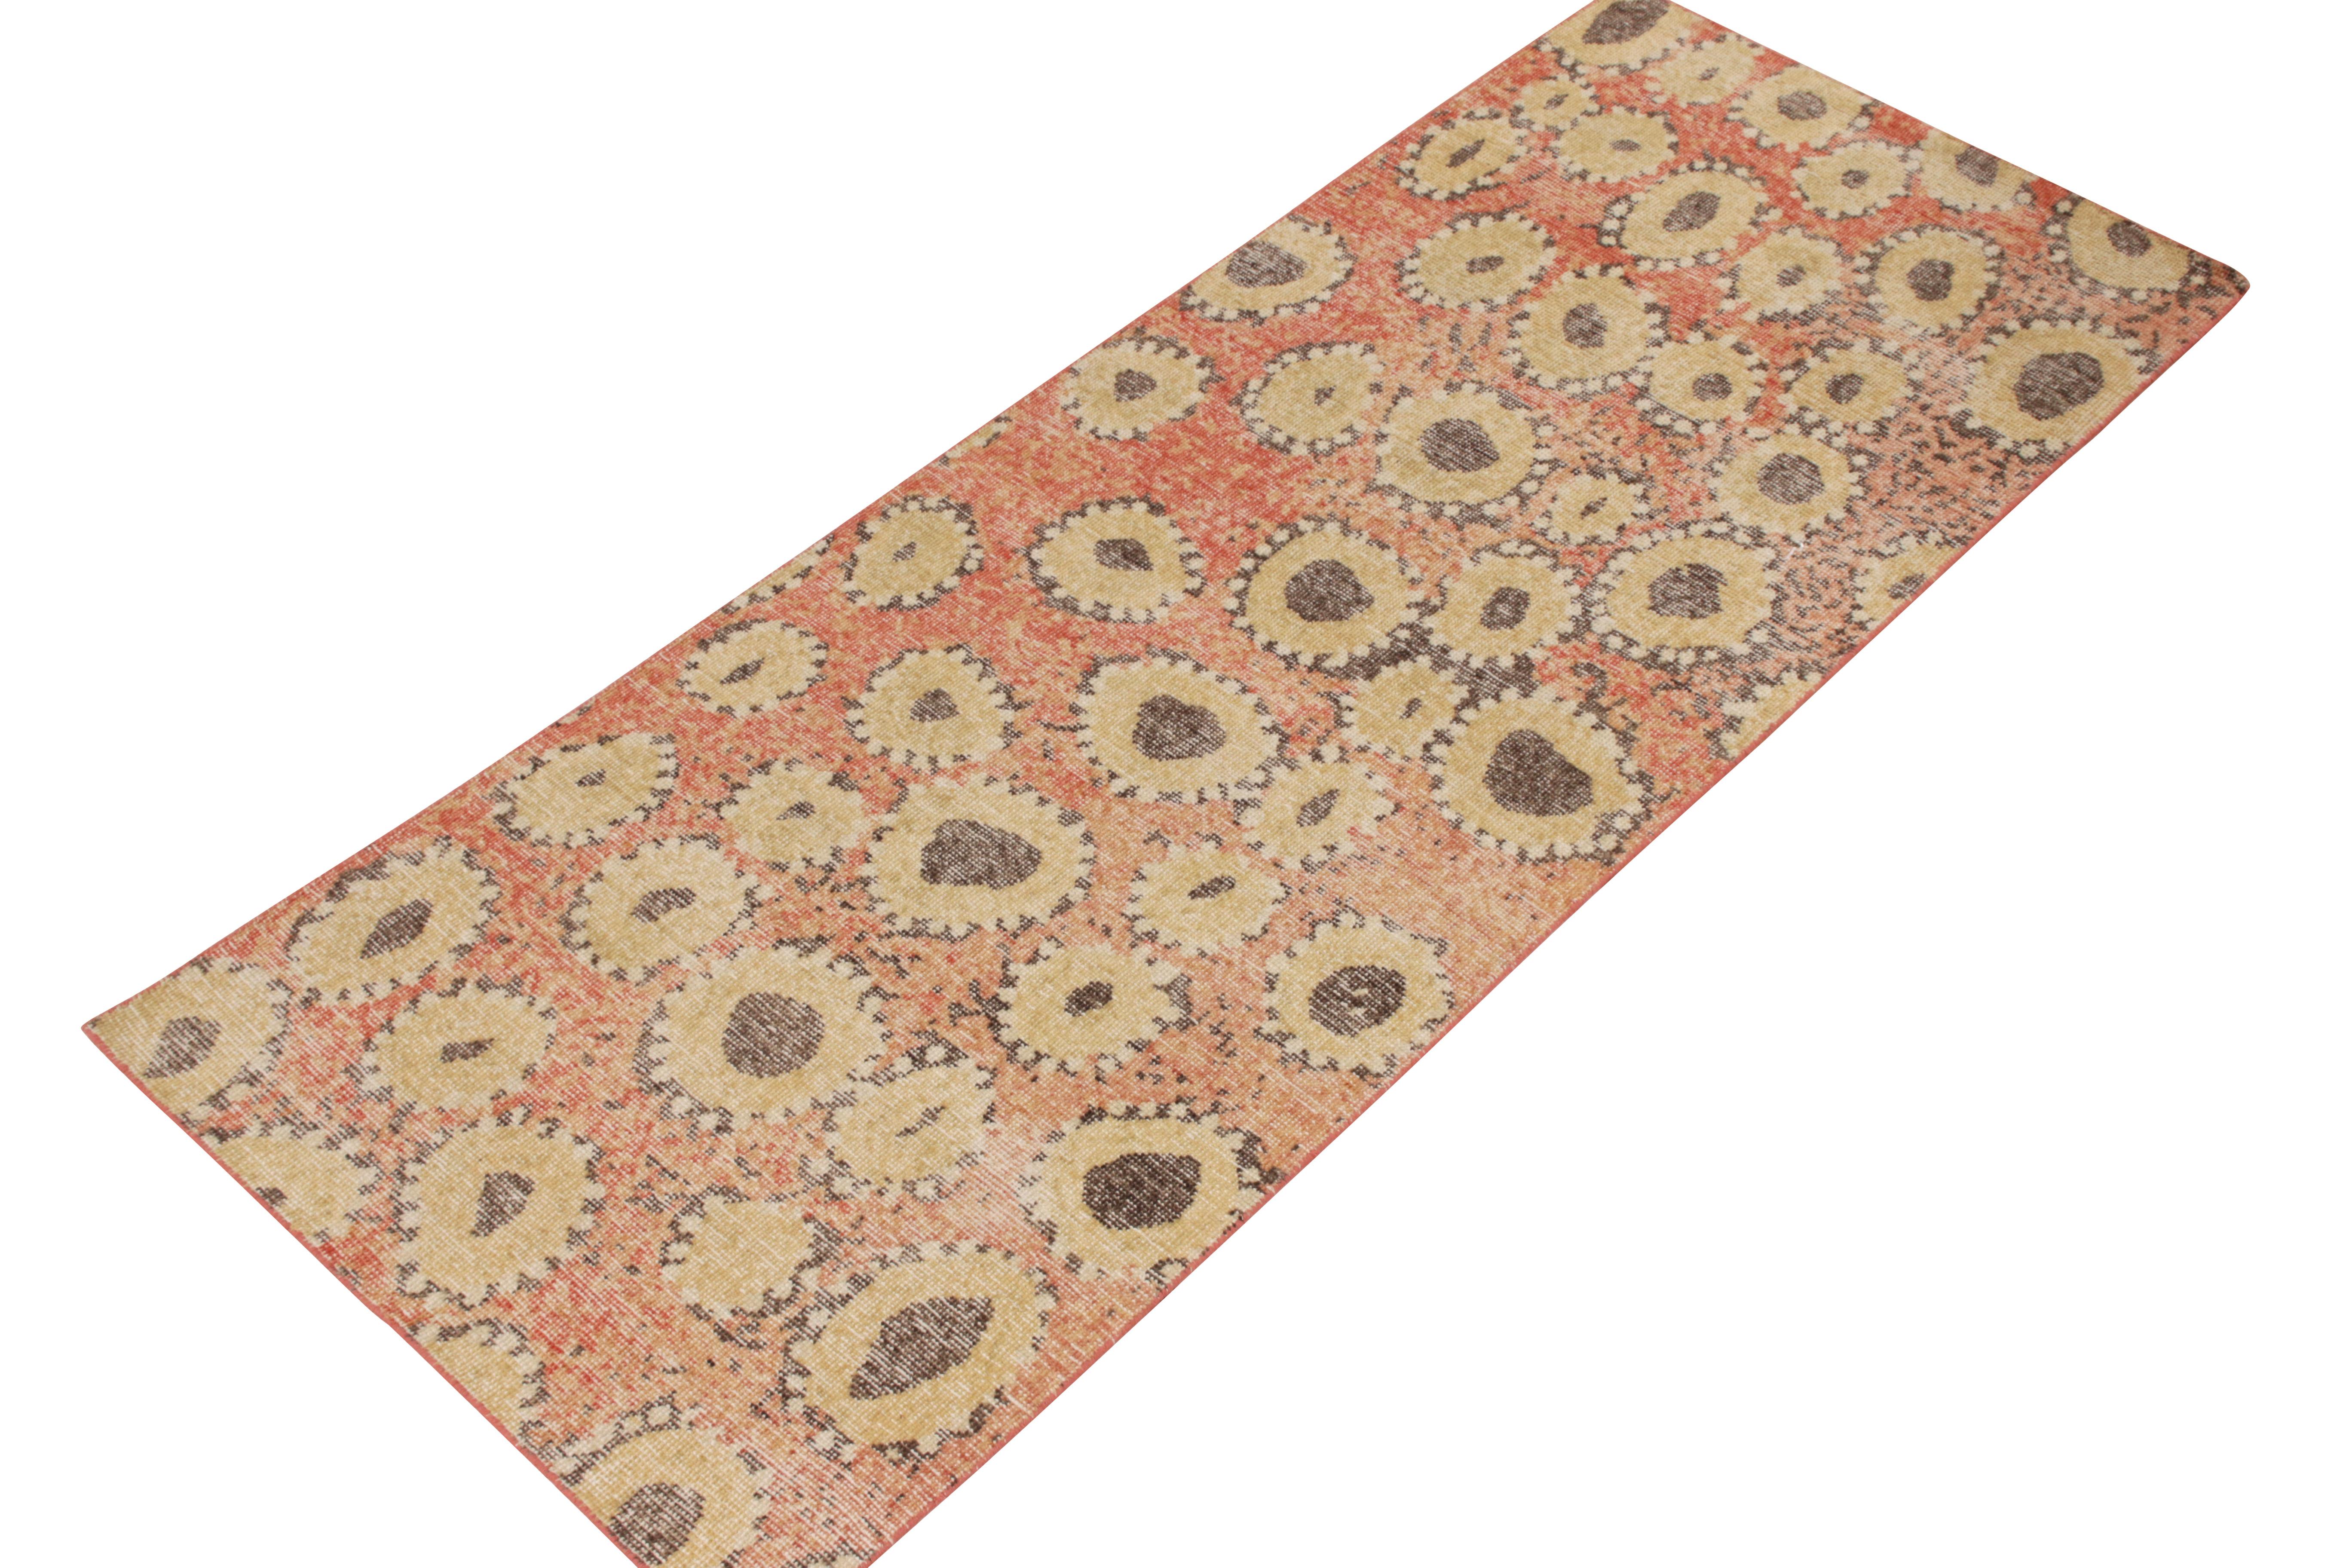 Indian Rug & Kilim's Distressed Style Modern Runner in Red, Beige-Brown Circle Pattern For Sale